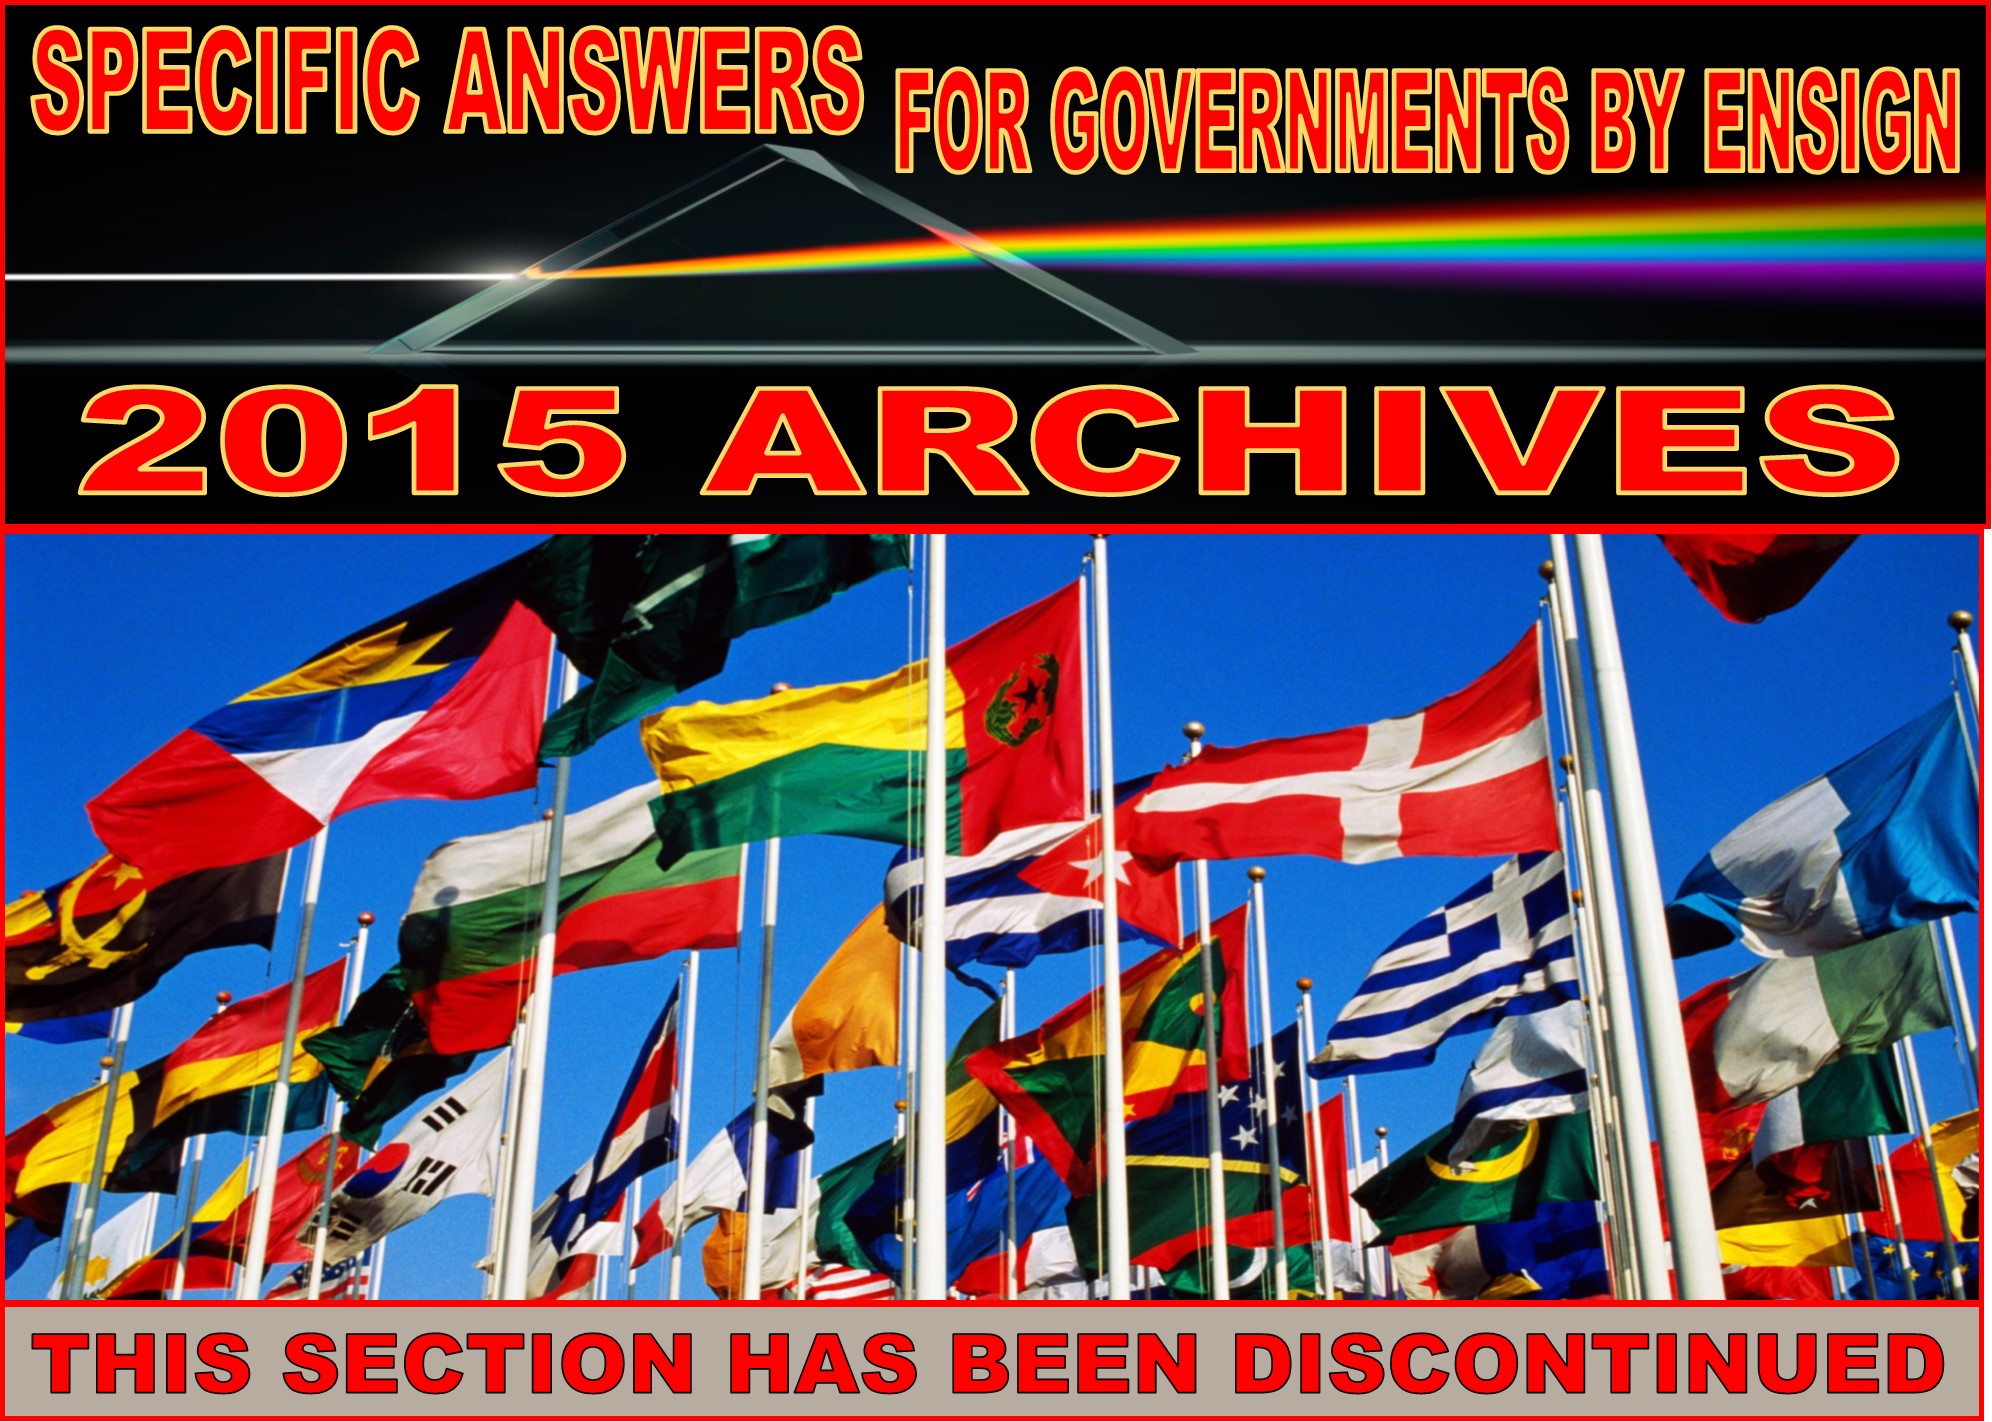 SPECIFIC ANSWERS FOR GOVERNMENTS BY ENSIGN 2015 ARCHIVES HEADER LOGO 5-20-2021